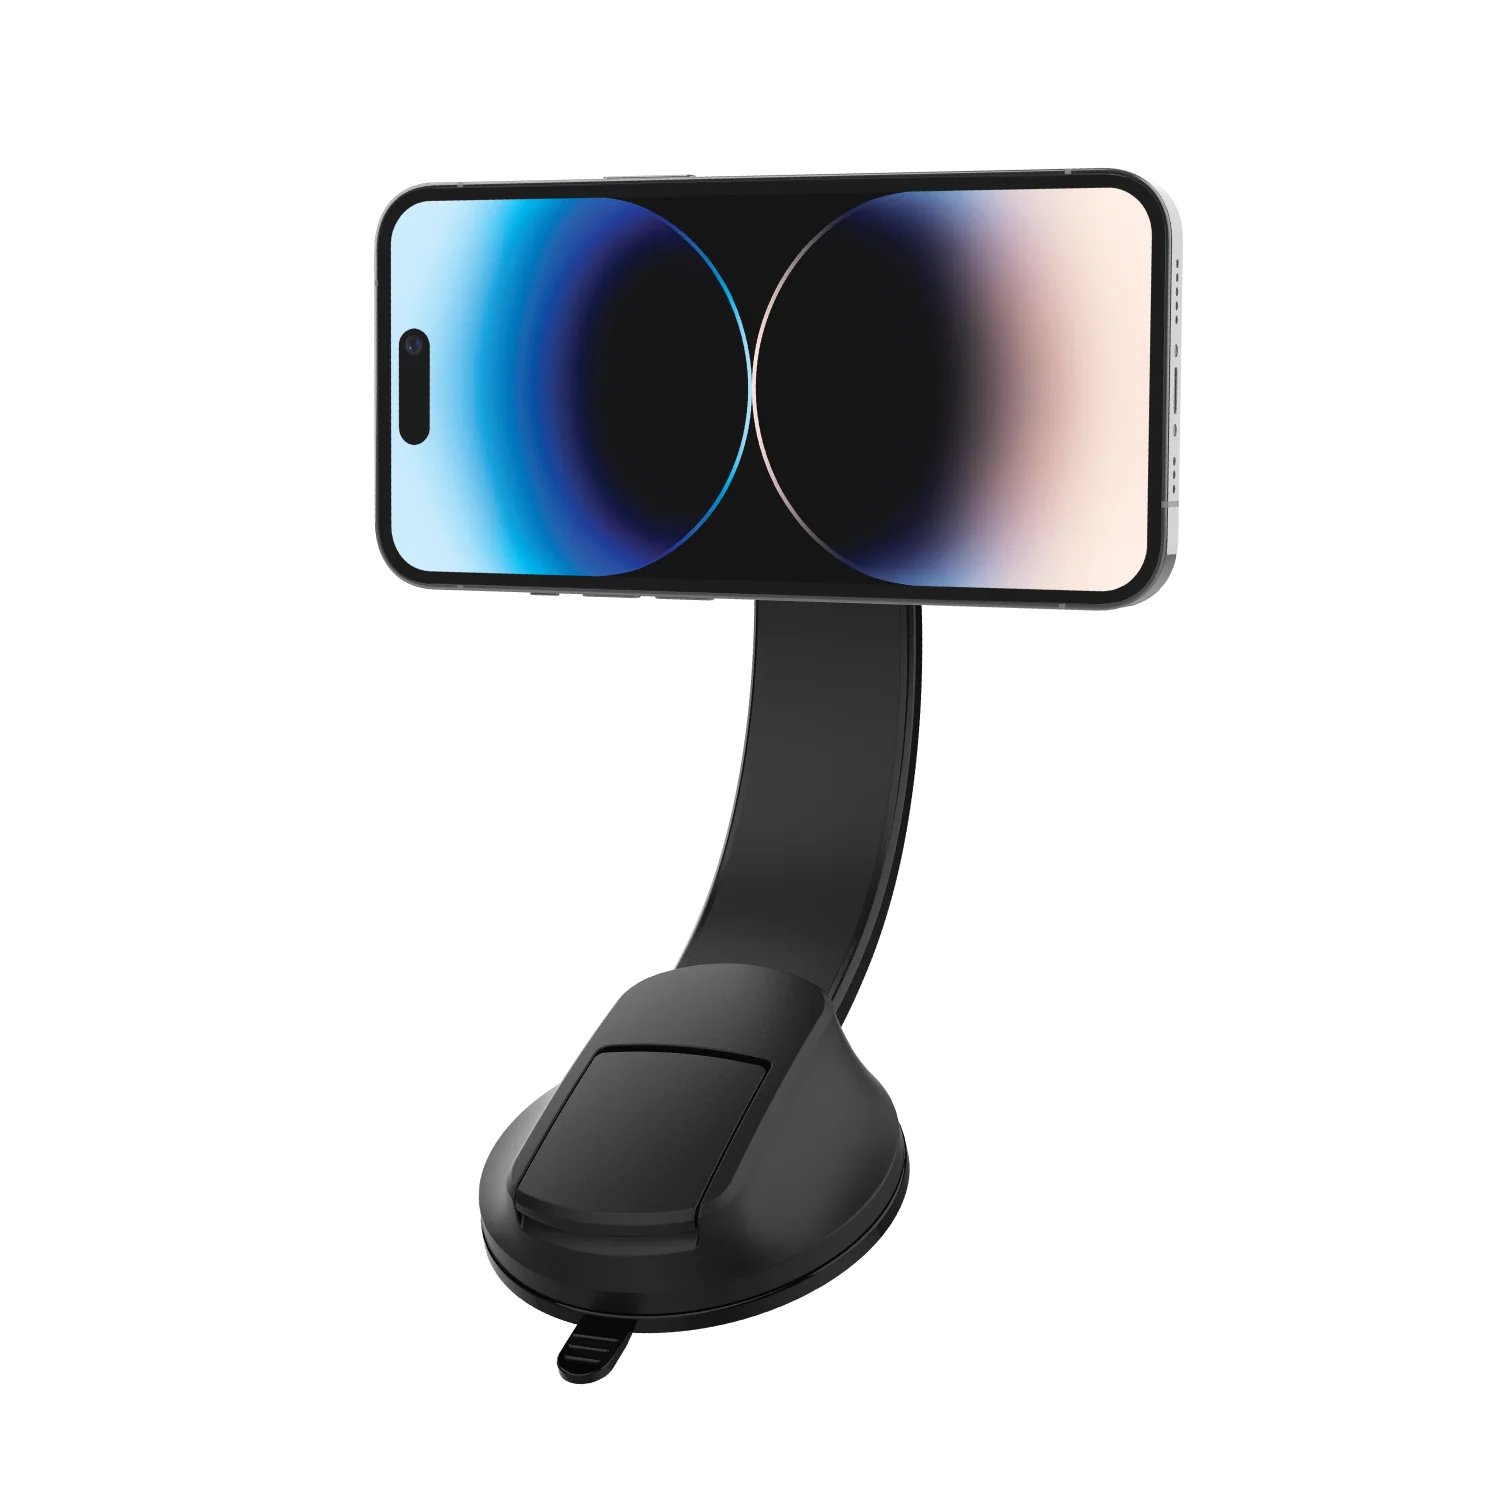 MOMAX Q.Mag Mount 5 15W magnetic wireless charging car mount (Suction cup mount)